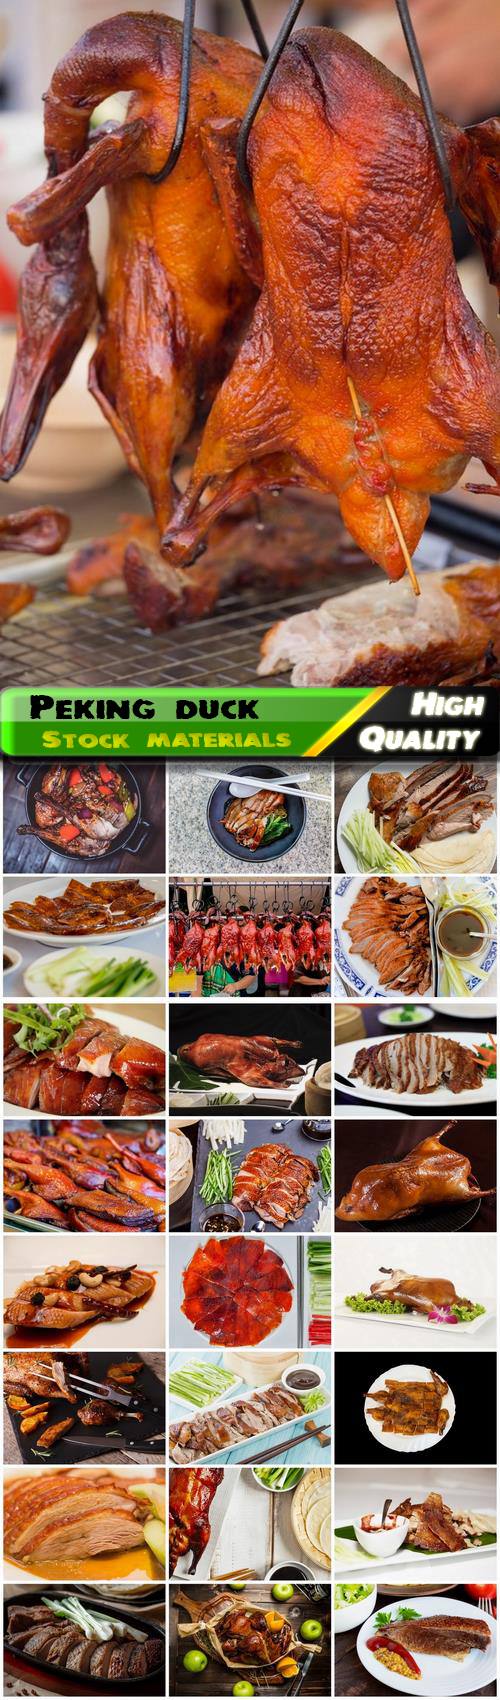 Peking duck famous dishes of Chinese cuisine 25 HQ Jpg